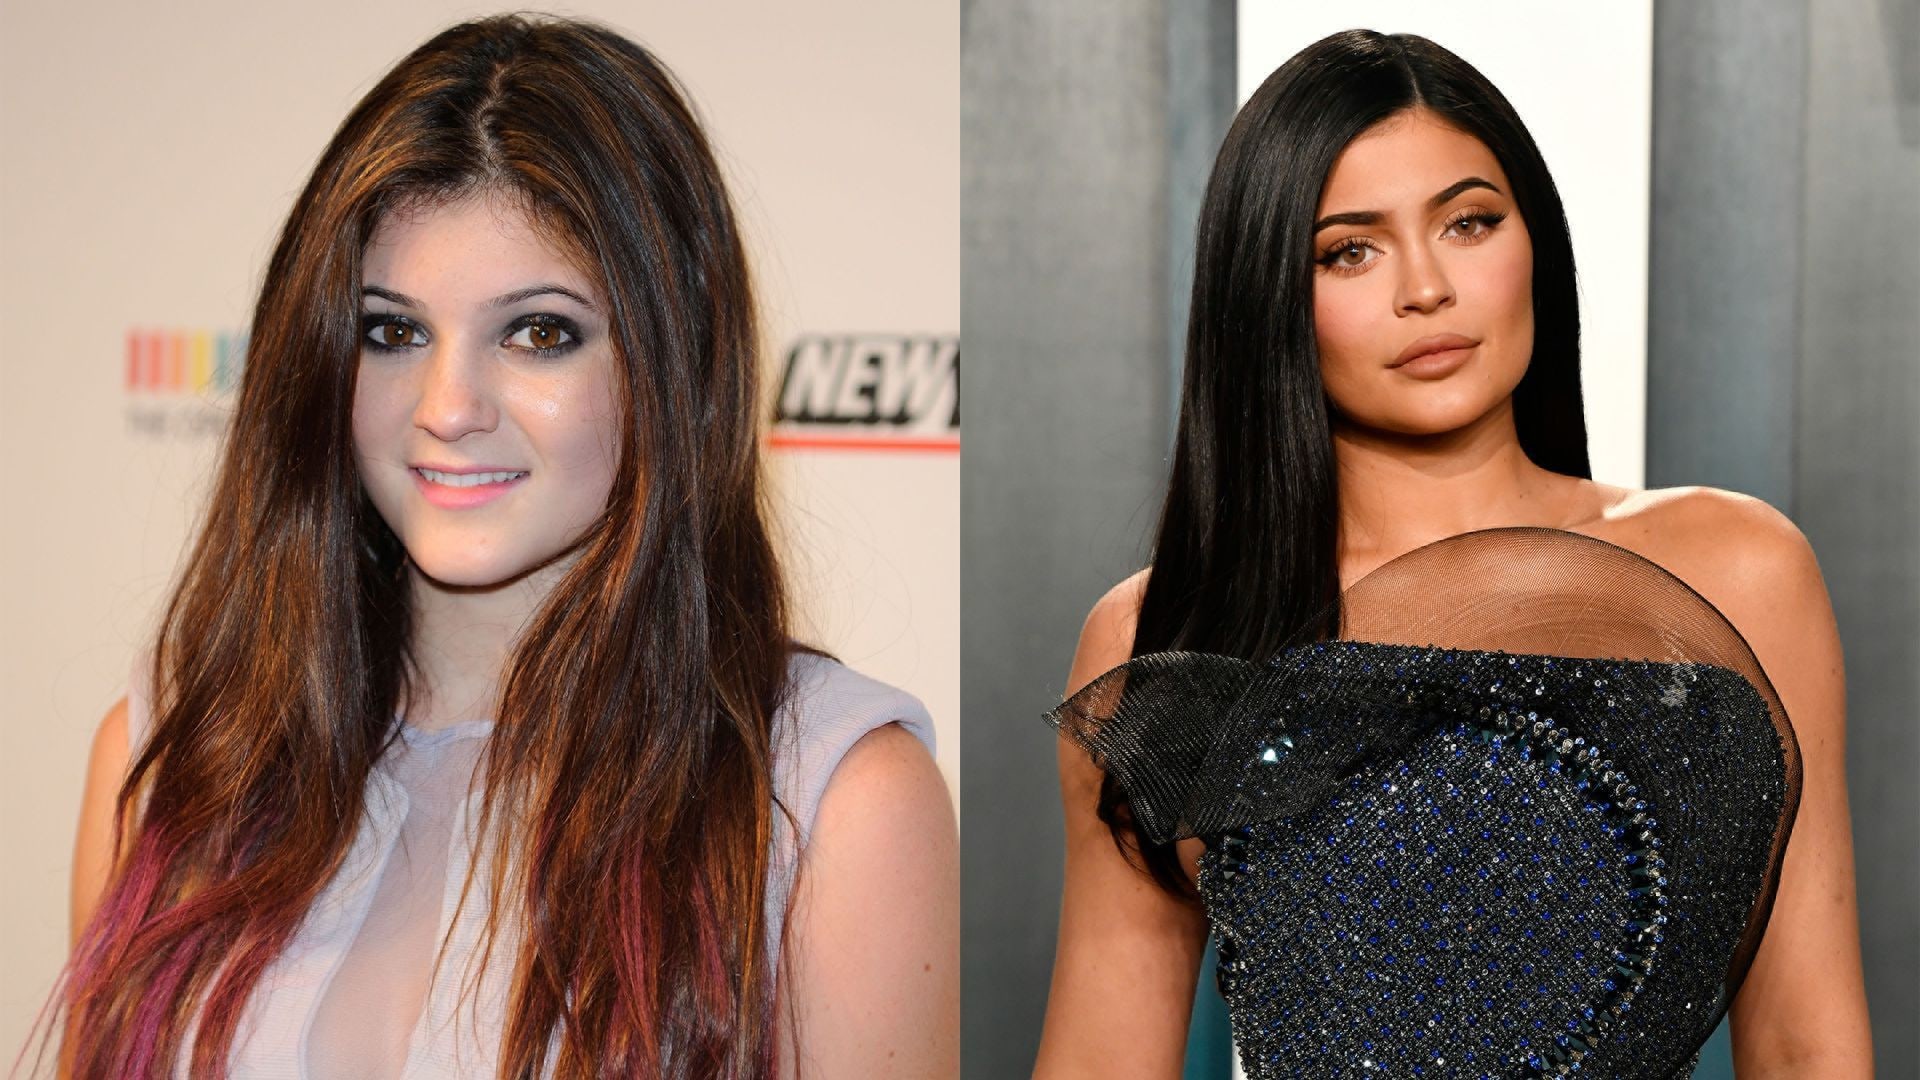 Left: Kylie Jenner in 2011 Right: Kylie Jenner in 2020